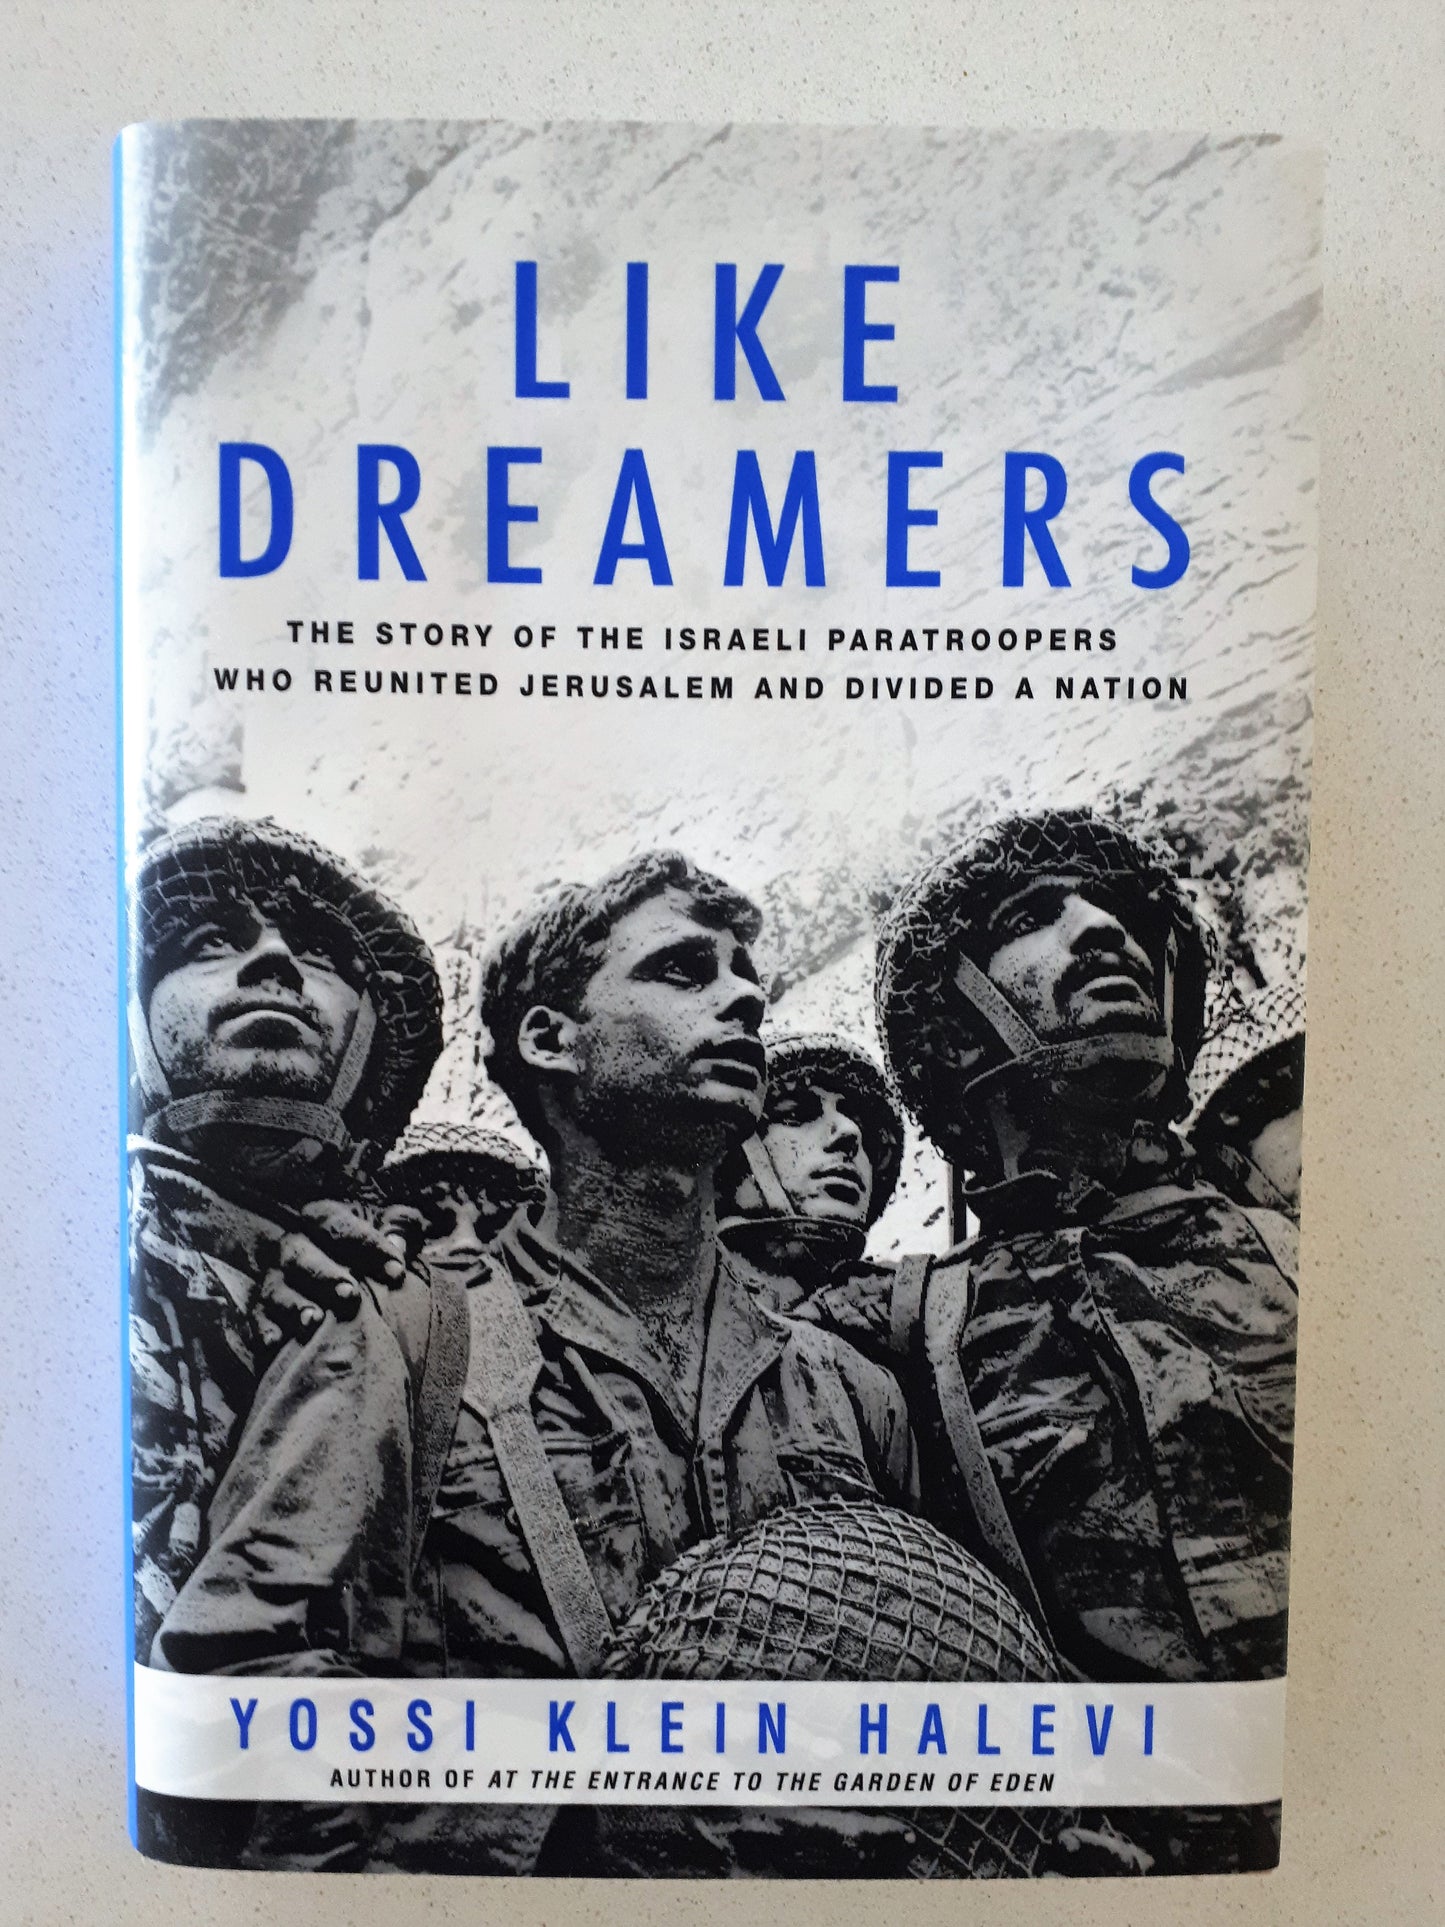 Like Dreamers  The Story of the Israli Paratroopers Who Reunited Jerusalem and Divided a Nation  by Yossi Klein Halevi